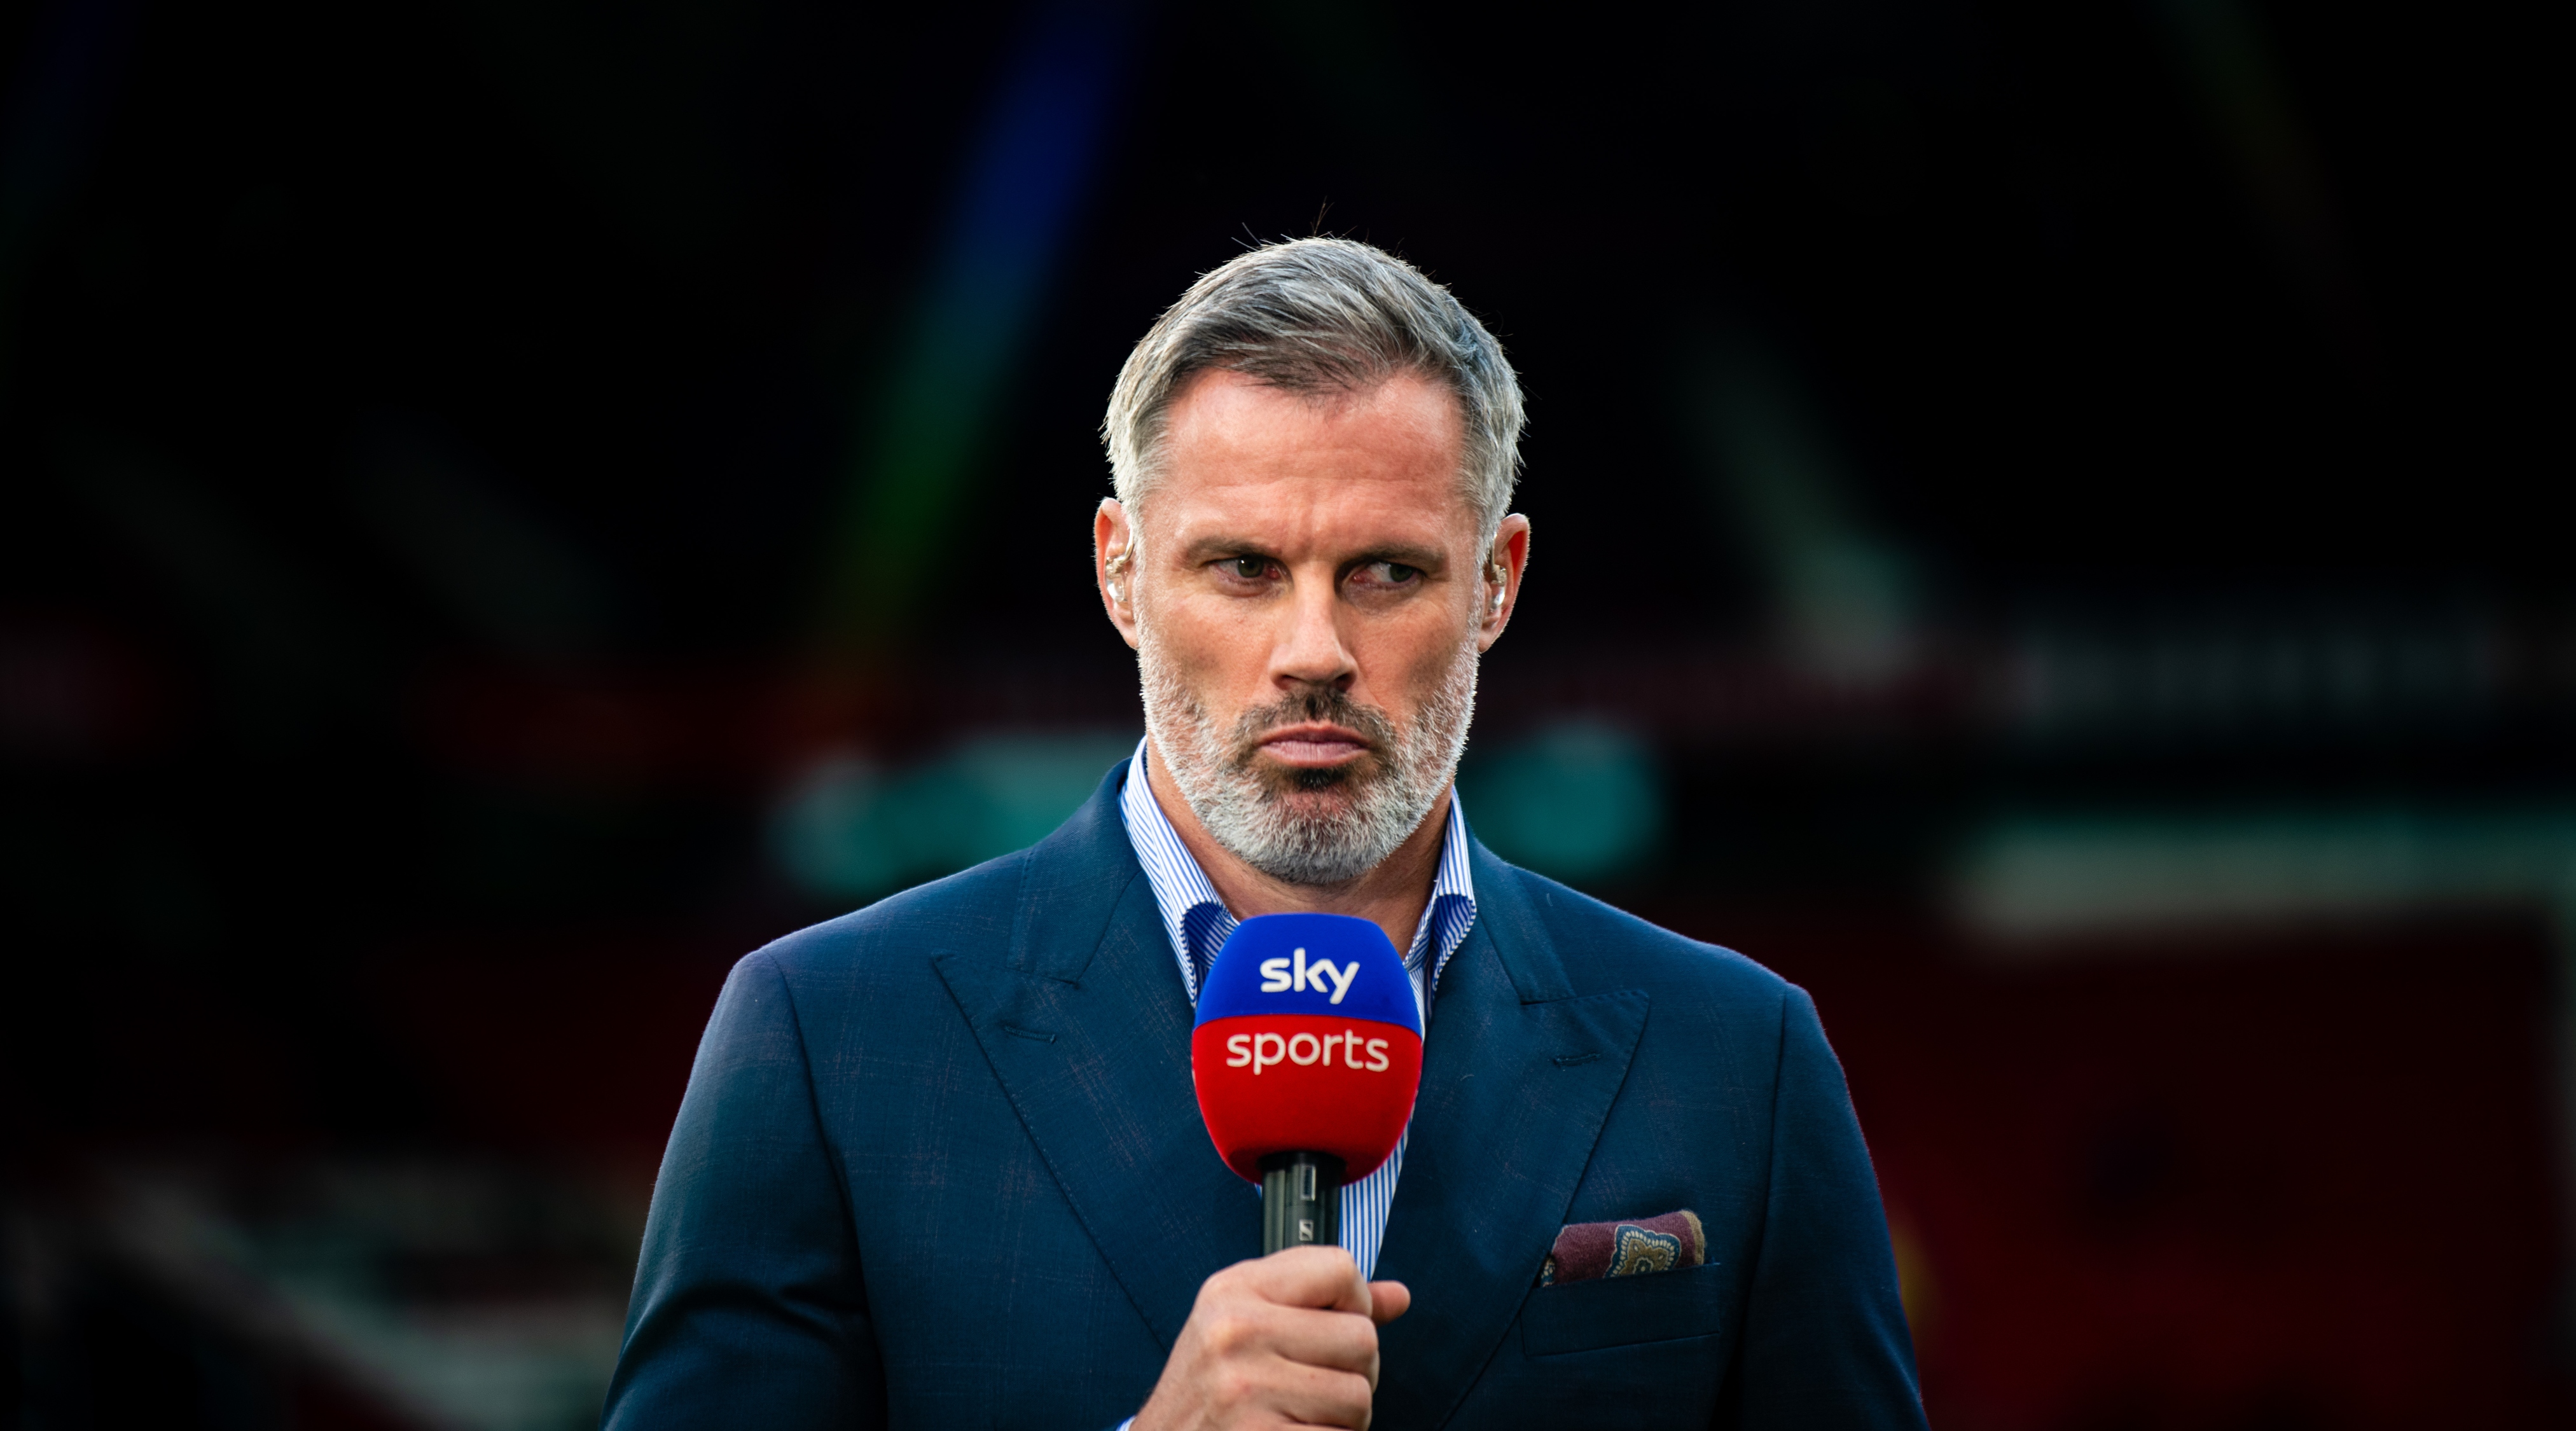 Jamie Carragher broadcasting ahead of the Premier League match between Manchester United and Liverpool FC at Old Trafford on August 22, 2022 in Manchester, England.